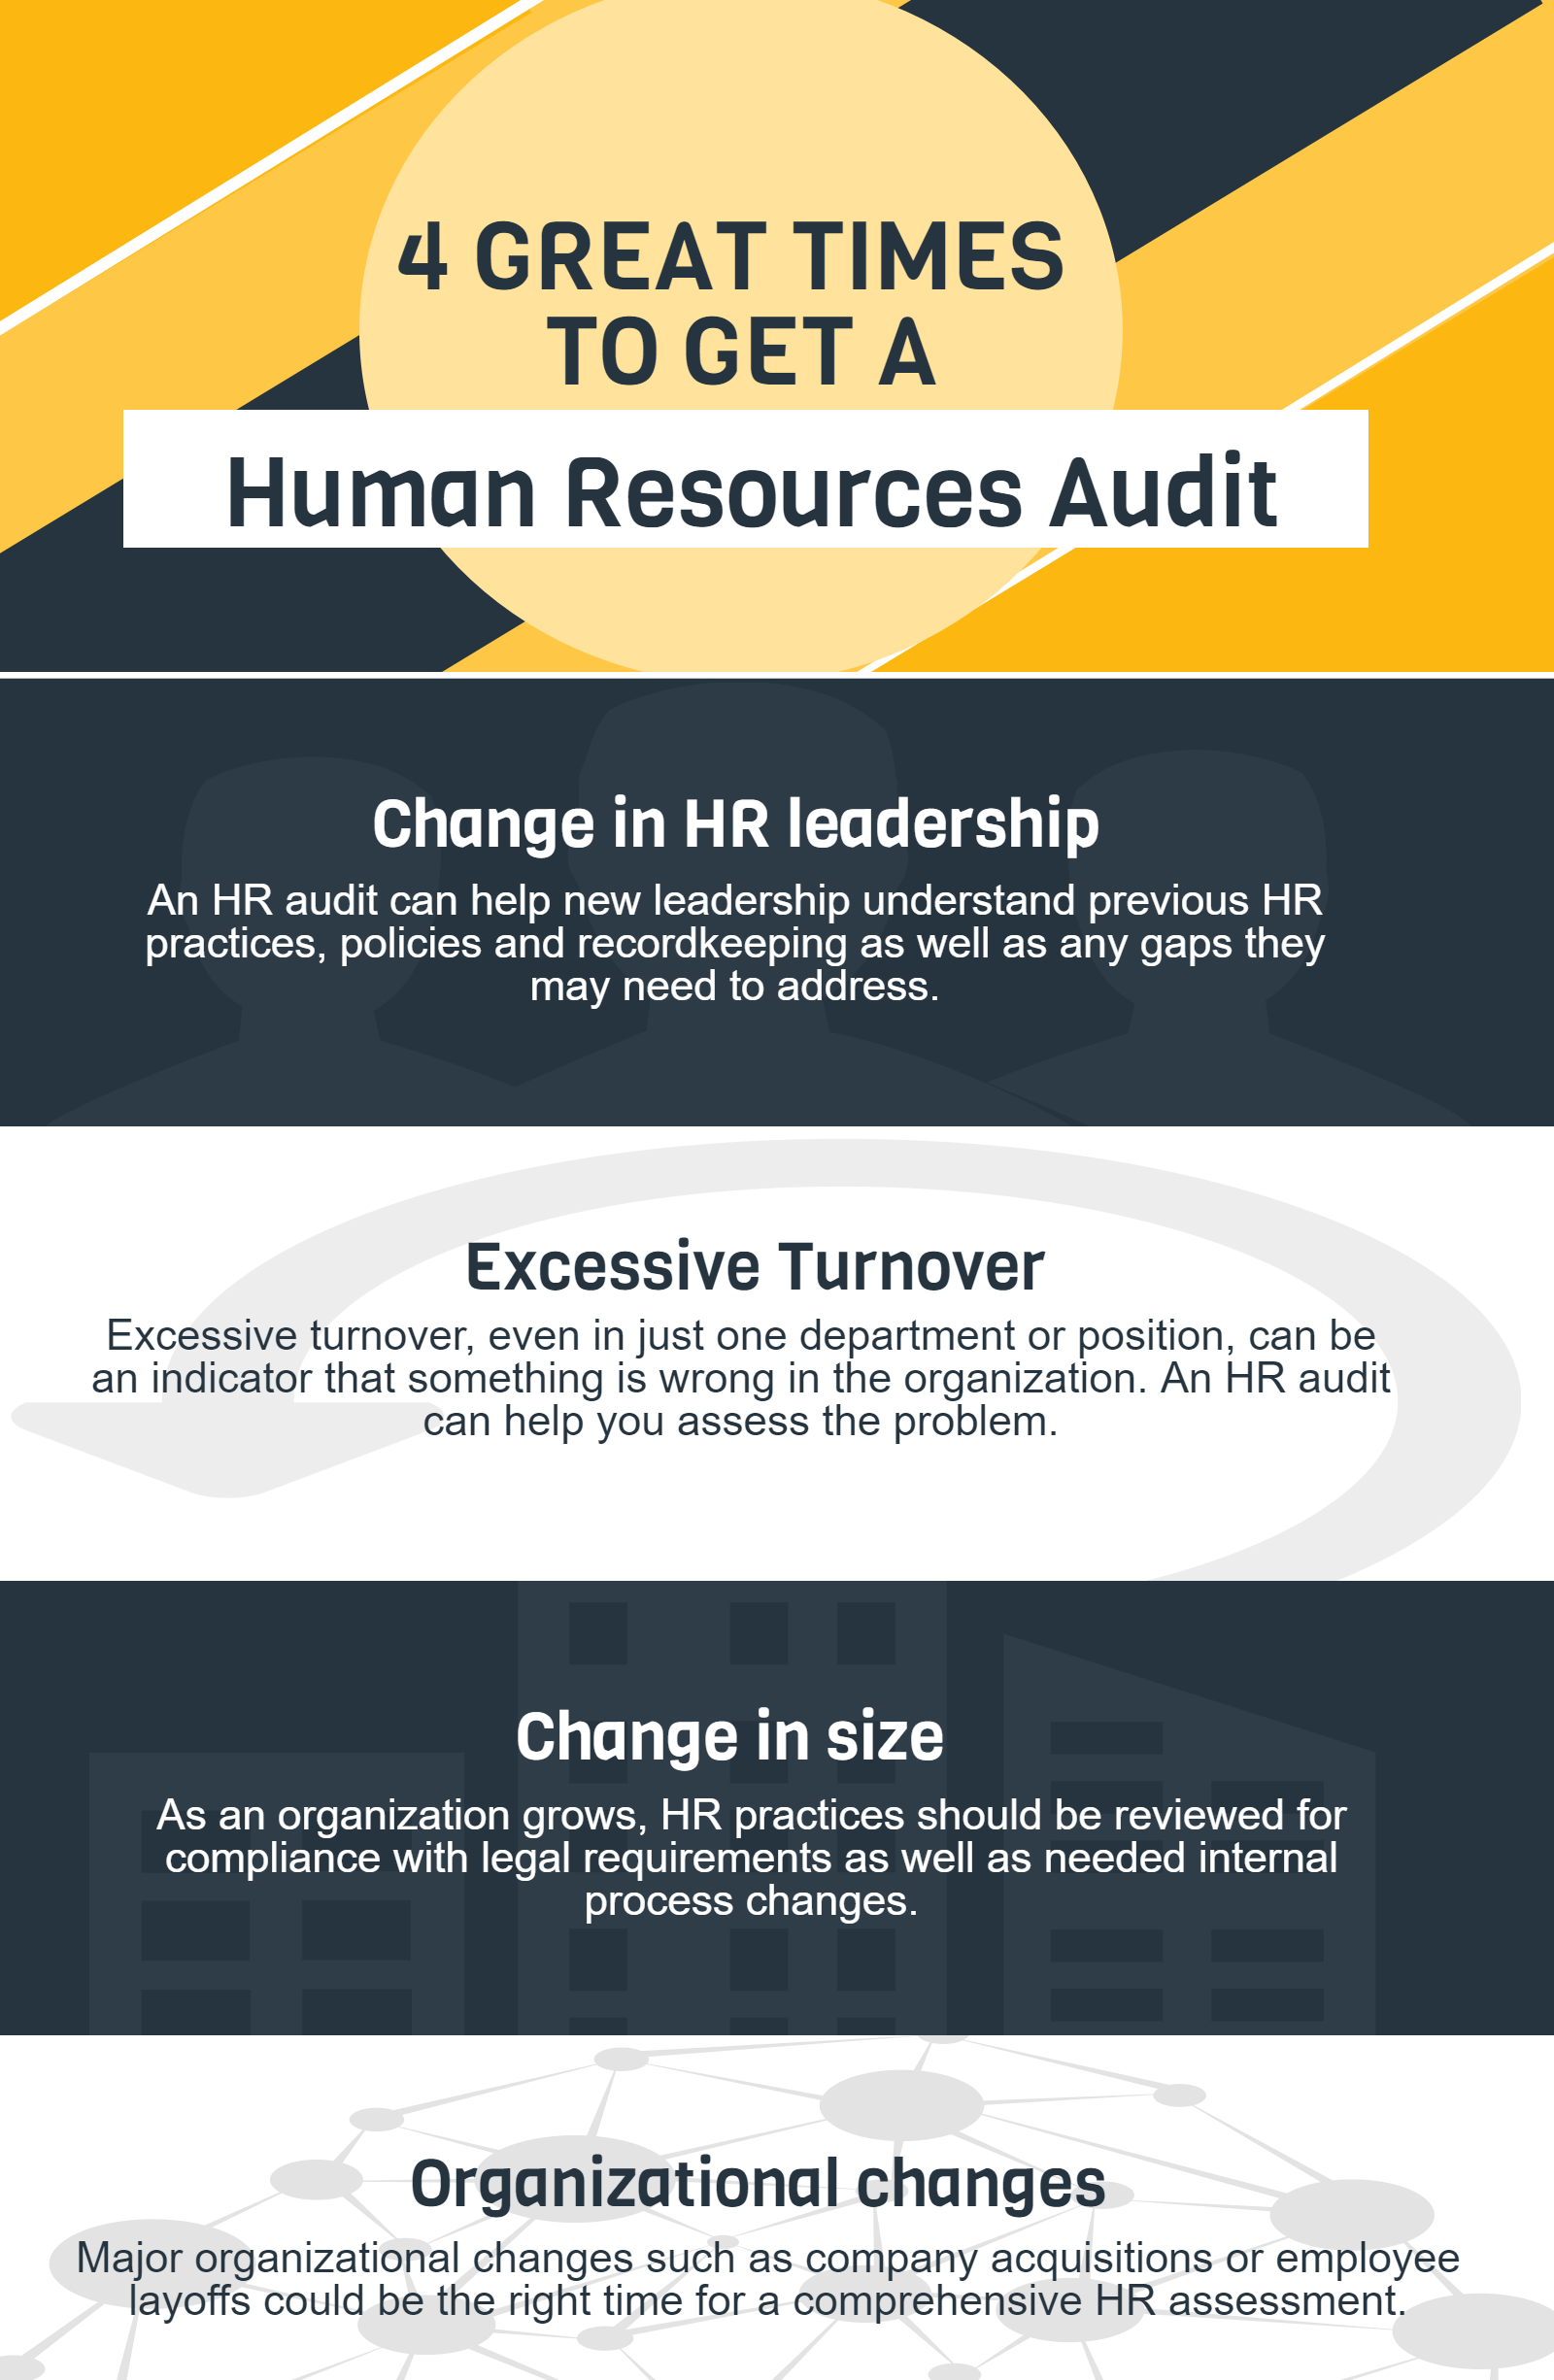 4 great times to get an HR audit infographic